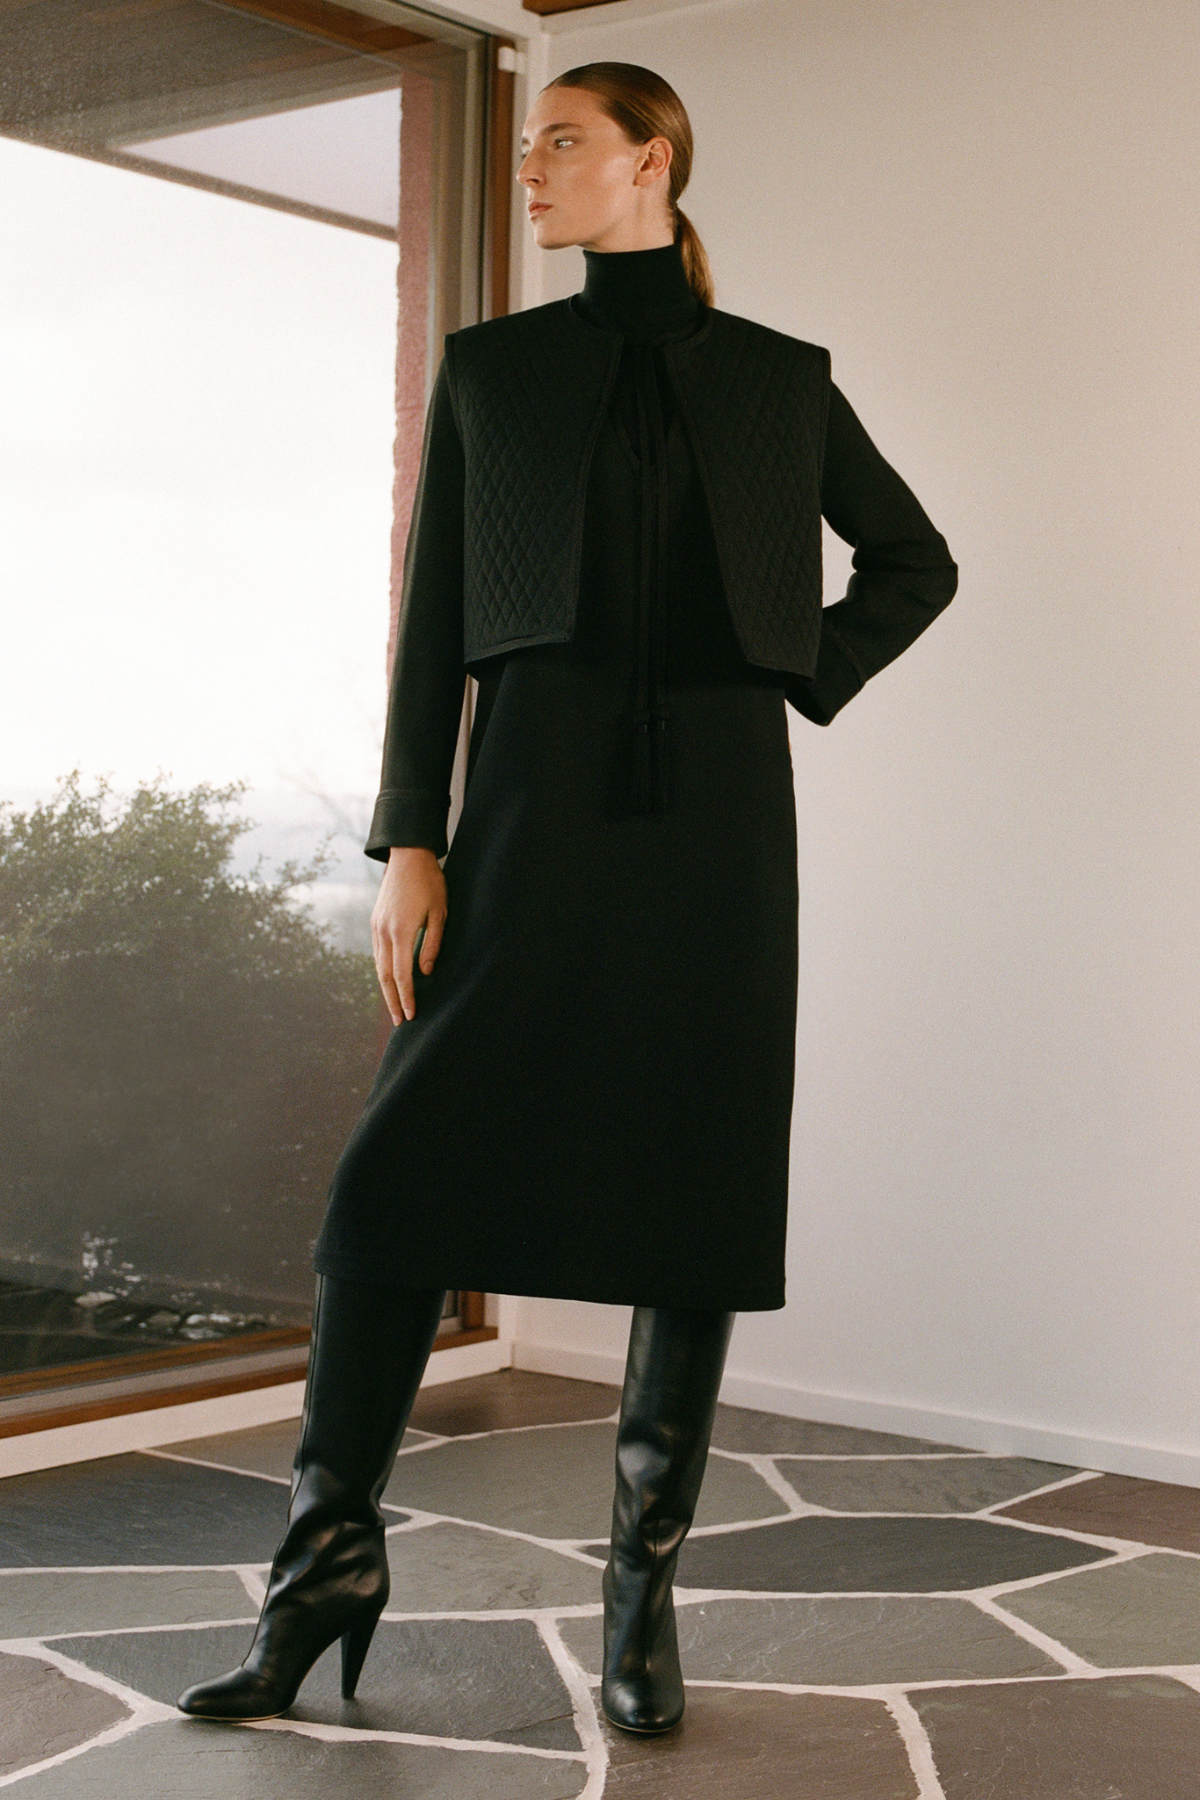 Nili Lotan Presents Its New Fall 2022 Women's Collection - Luxferity ...